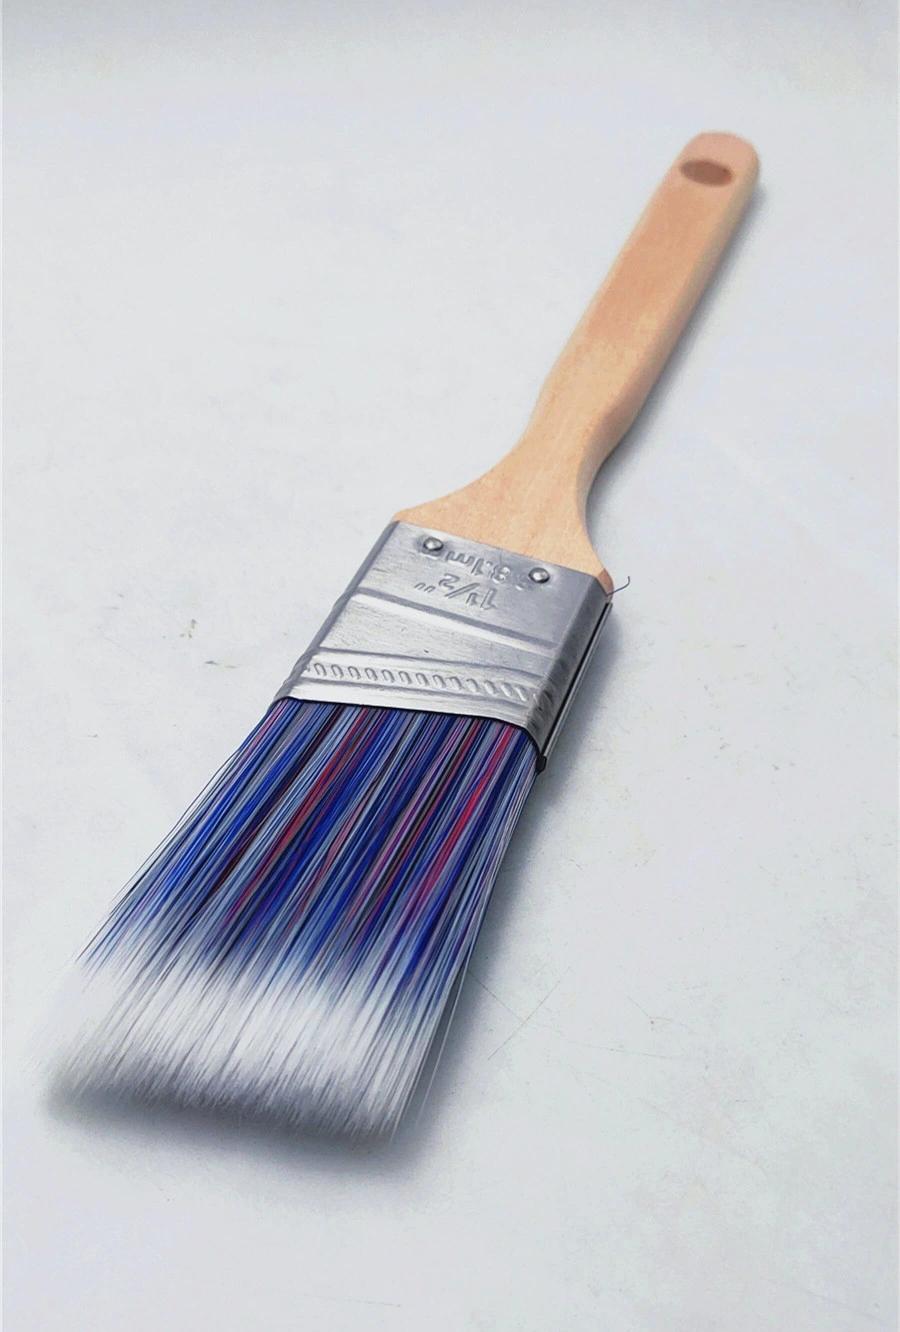 Wood Handle Paint Roller Brush, and Paint Roller Brush